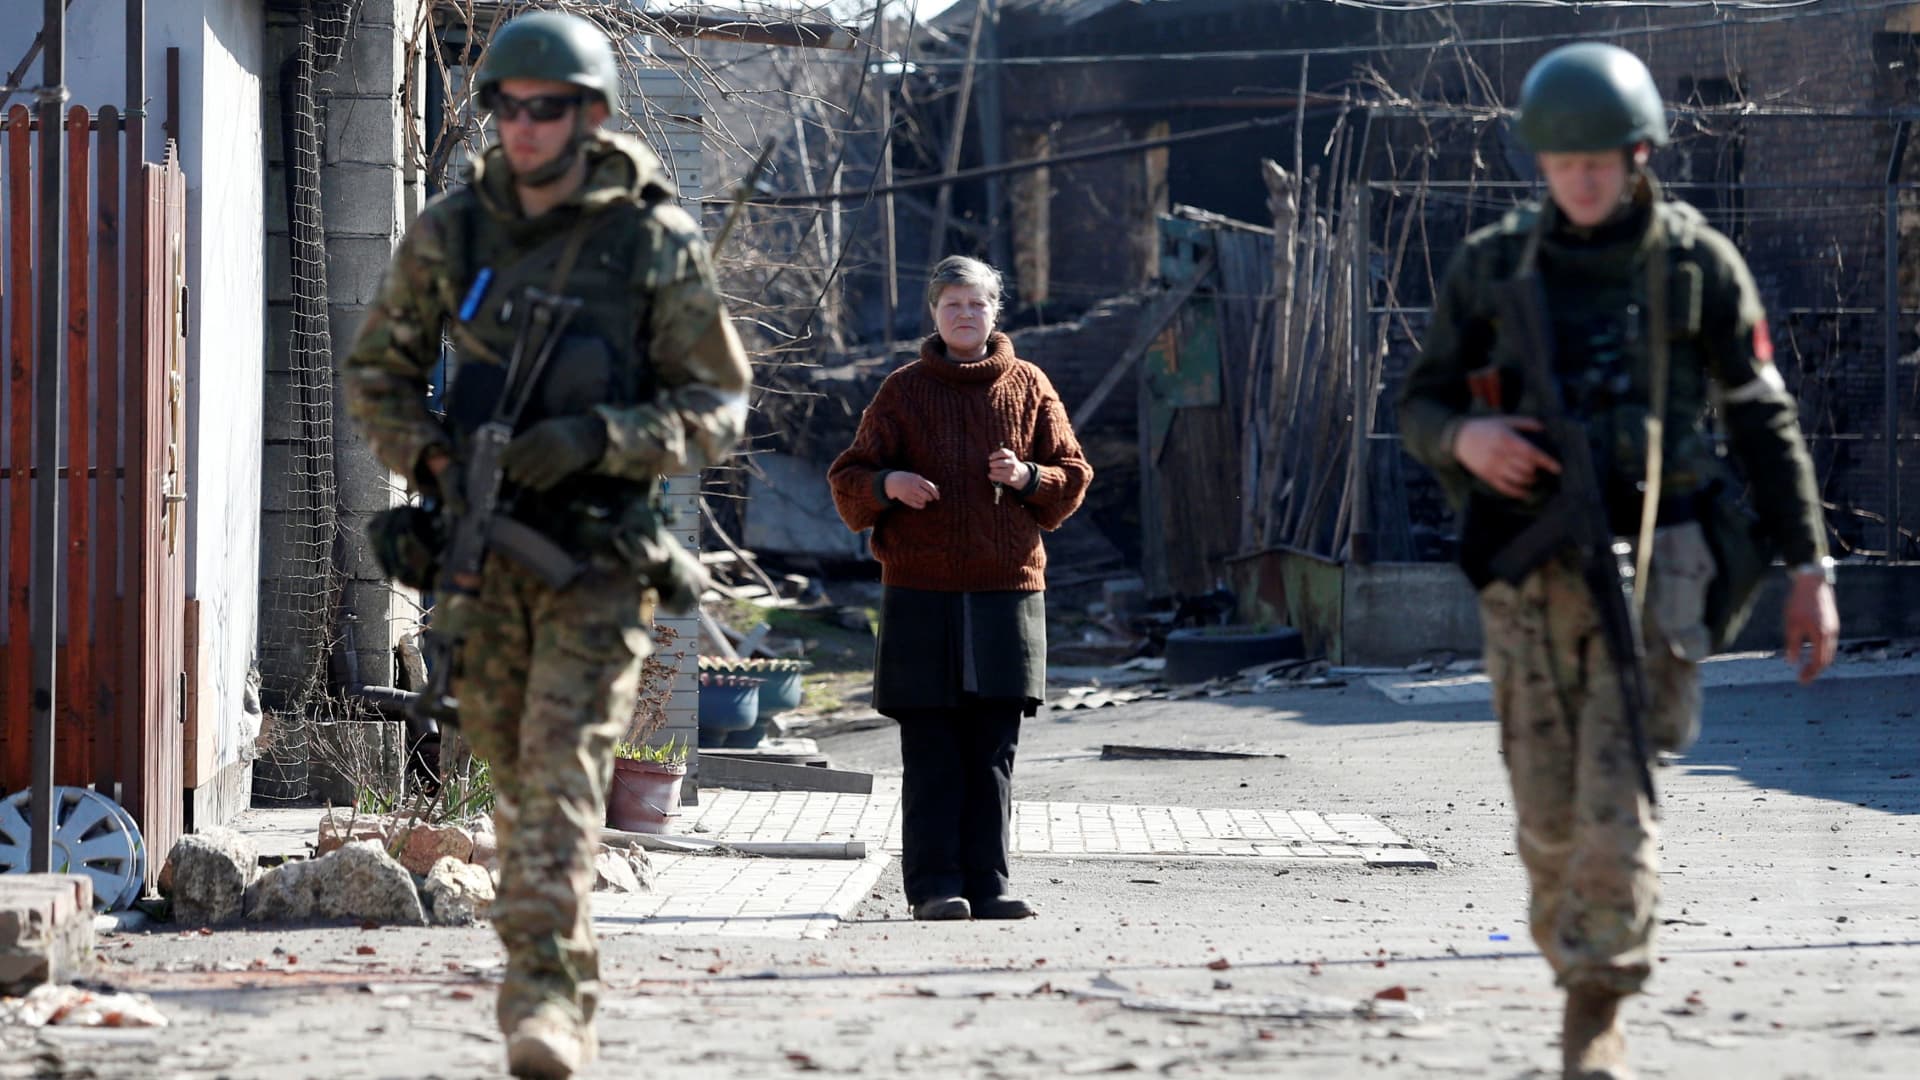 A local resident looks on as service members of pro-Russian troops inspect streets during Ukraine-Russia conflict in the southern port city of Mariupol, Ukraine April 7, 2022.